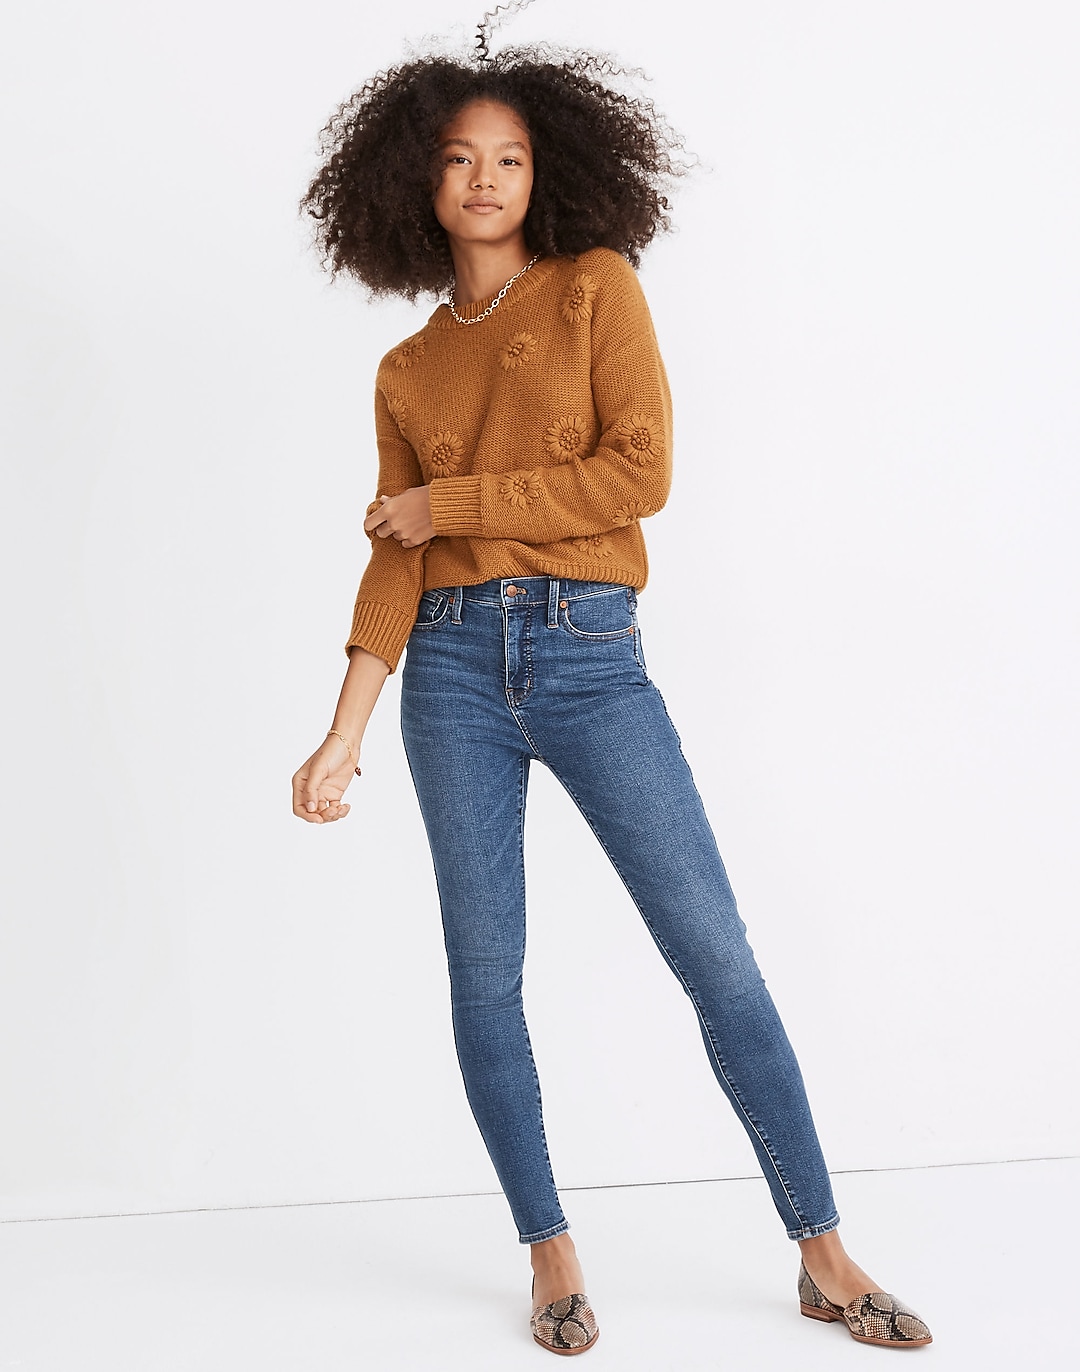 4 Tips for Buy The Skinny Jeans for Petite Women This Christmas